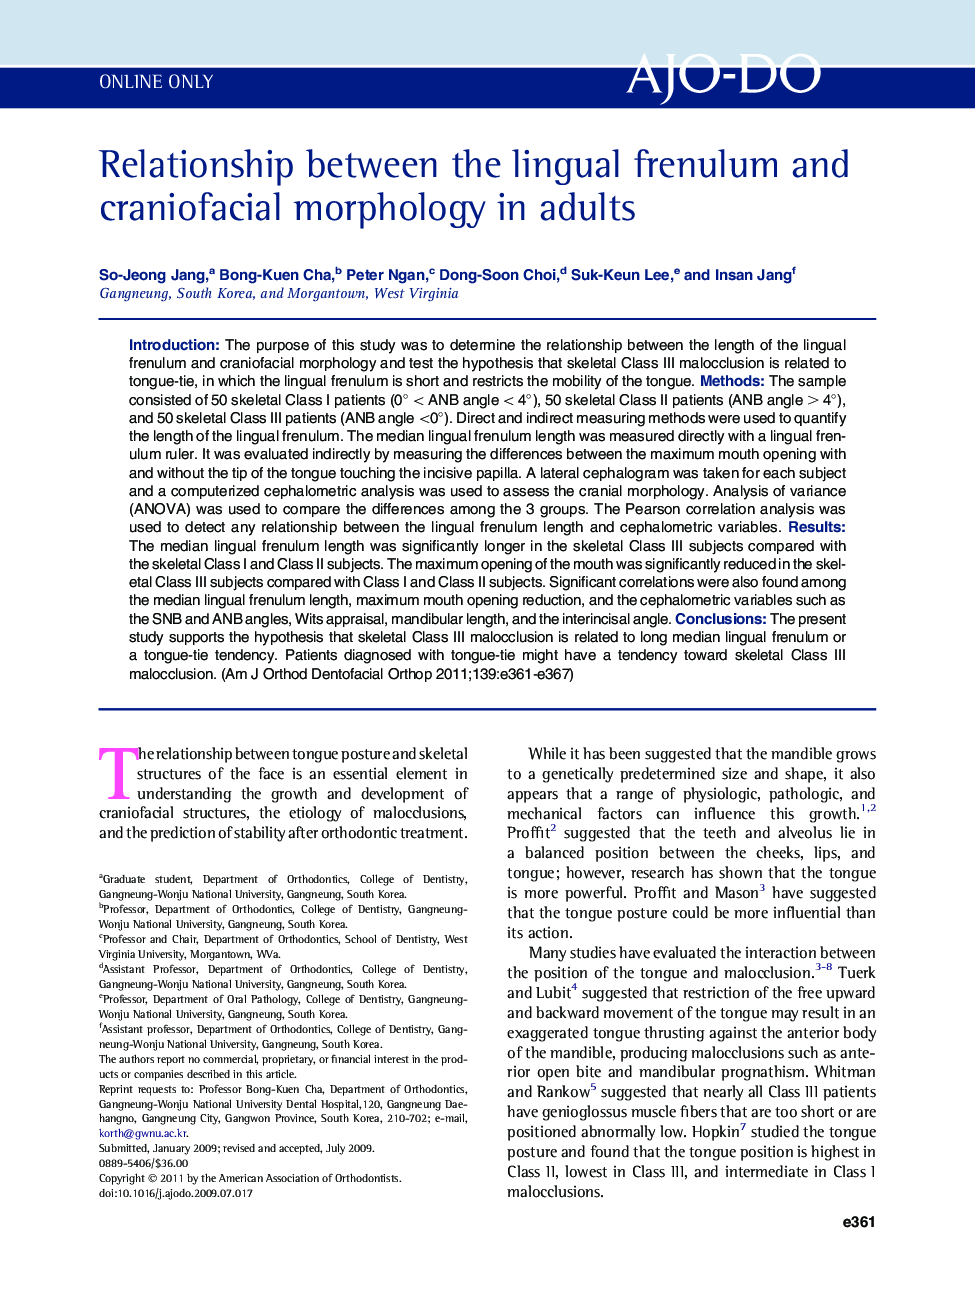 Relationship between the lingual frenulum and craniofacial morphology in adults 